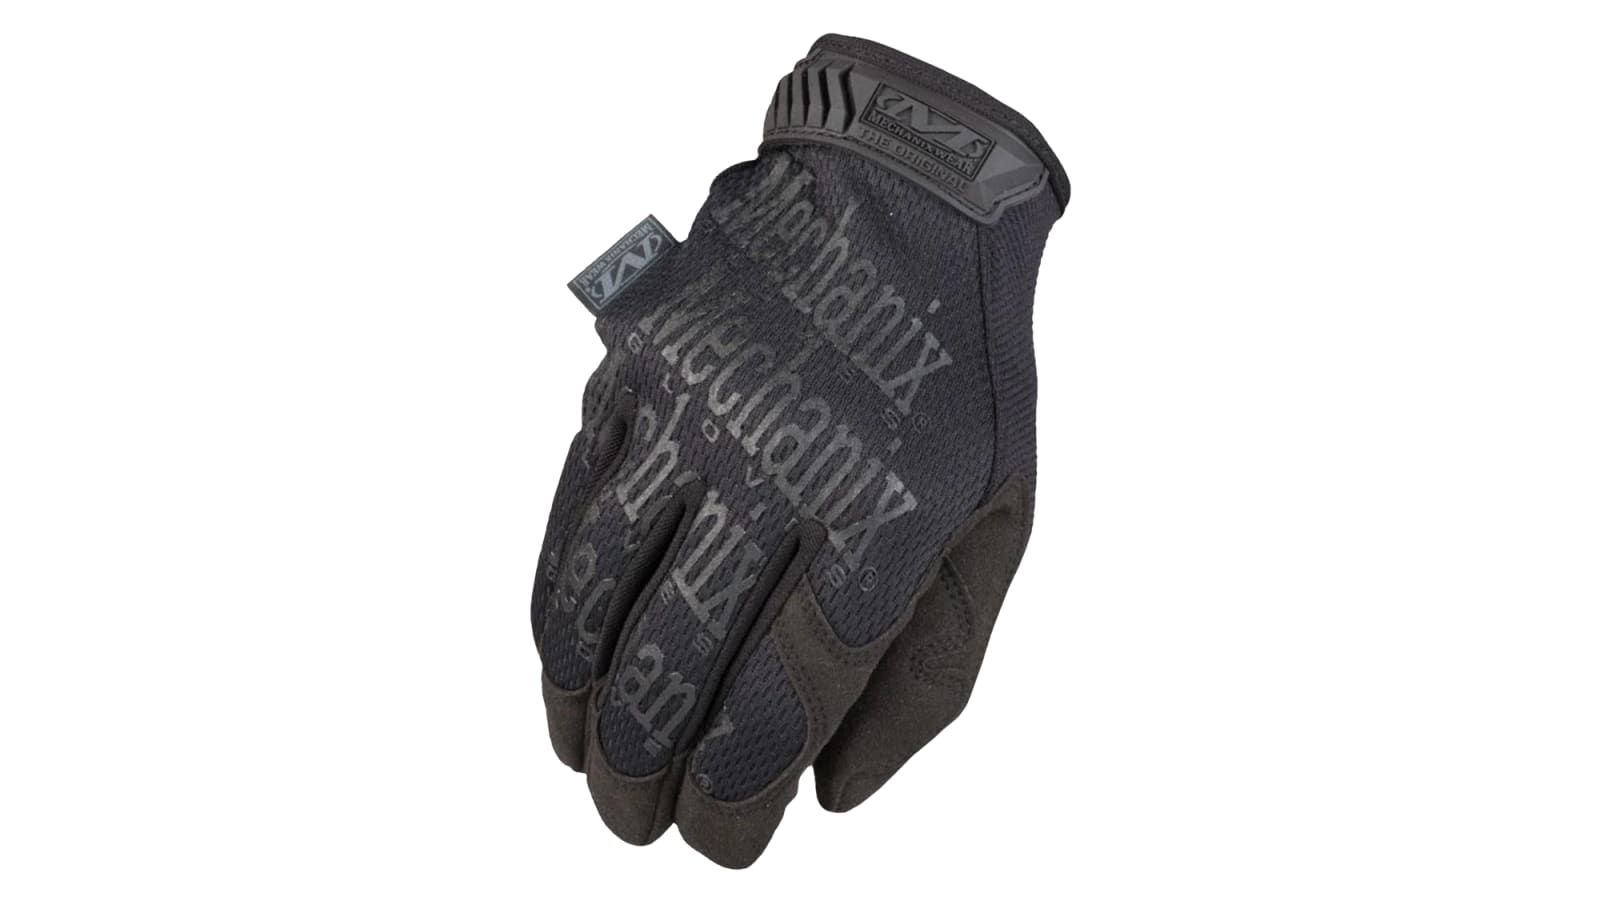 https://assets.roguefitness.com/f_auto,q_auto,c_limit,w_1600,b_rgb:ffffff/catalog/Straps%20Wraps%20and%20Support%20/Hand%20Protection/Gloves/MG0001/MG0001-h_pyfett.png